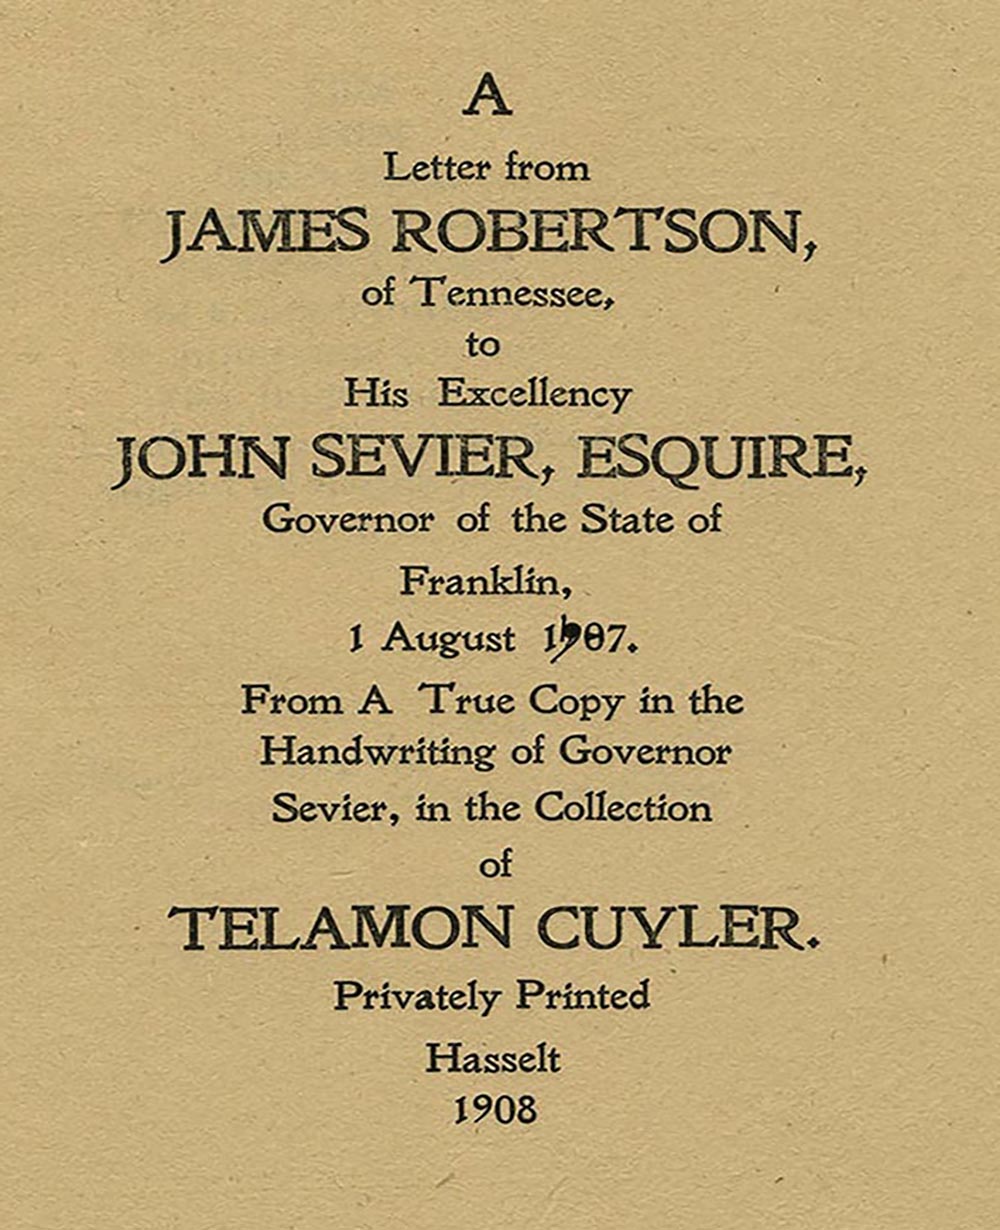 James Robertson letter to Governor John Sevier of State of Franklin